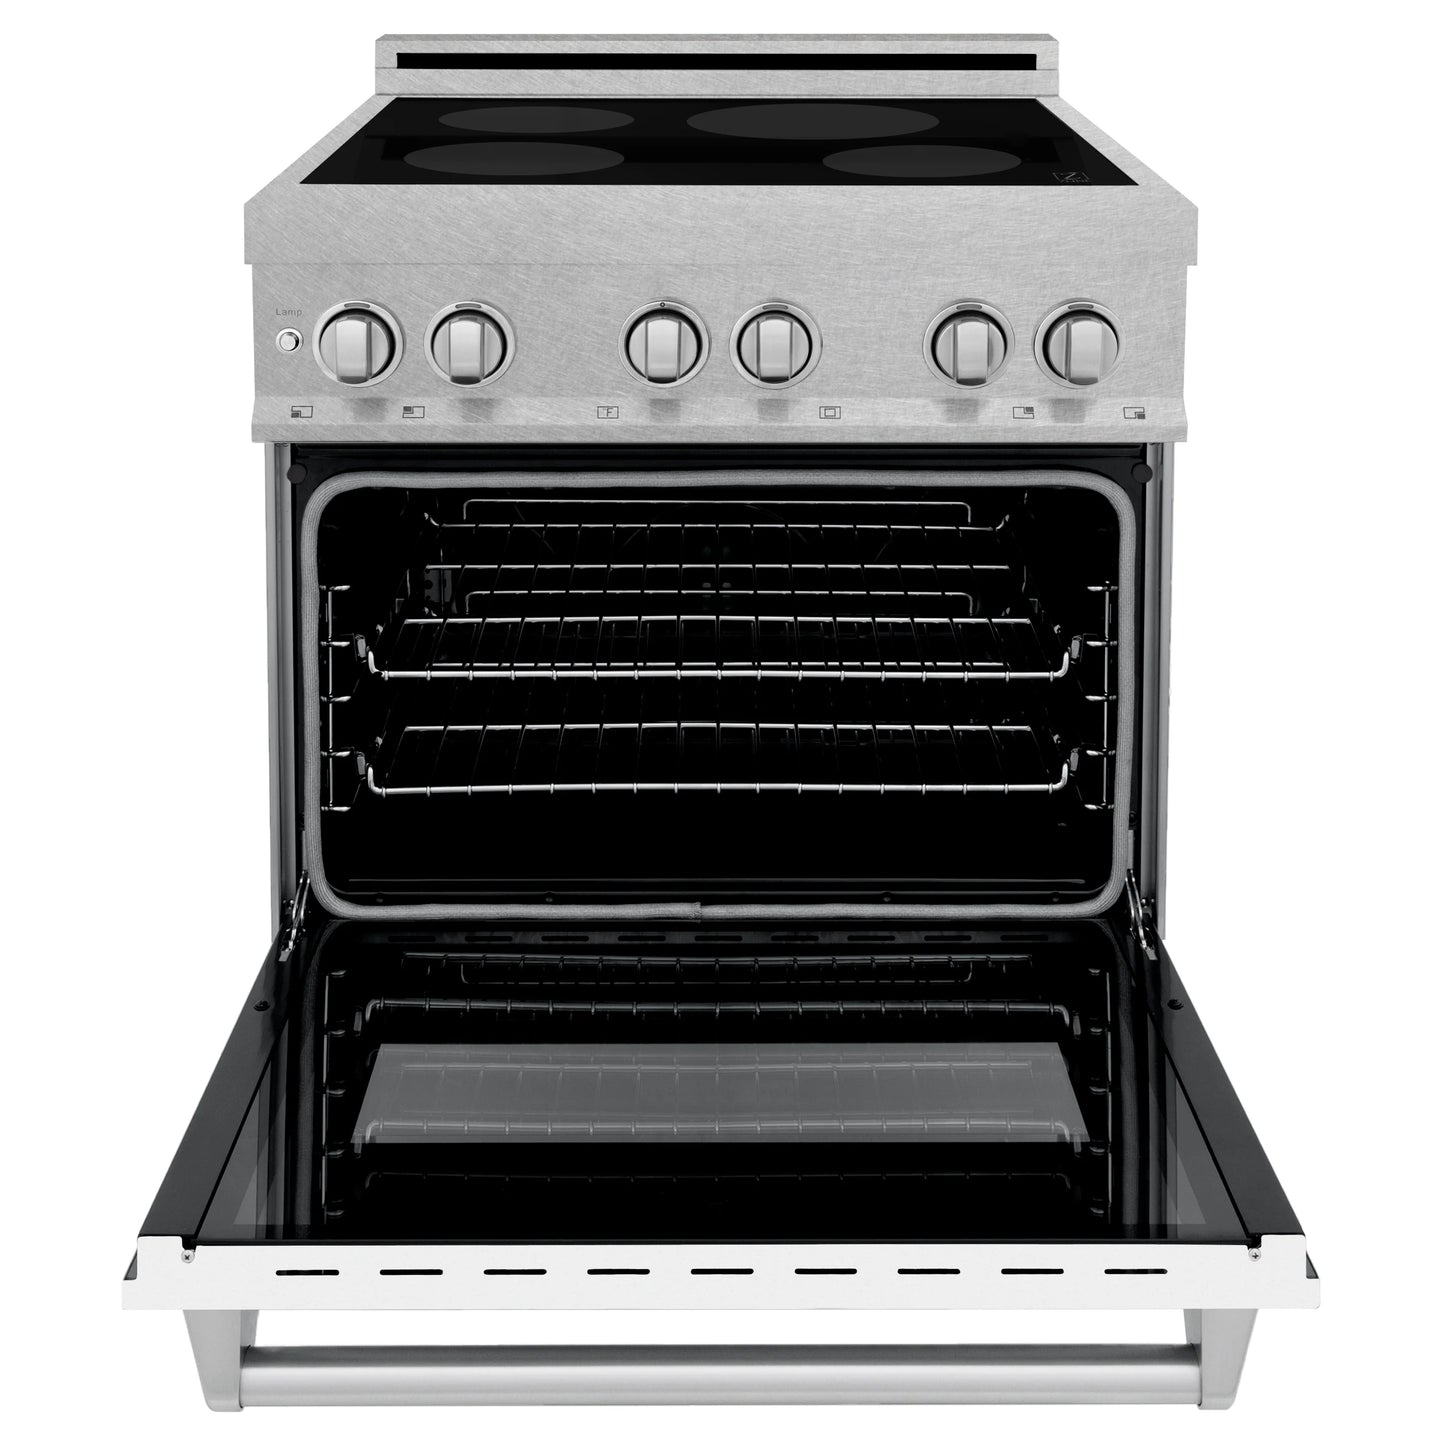 ZLINE 30 in. Induction Range in Fingerprint Resistant Stainless Steel with a 4 Element Stove, Electric Oven, and White Matte Door (RAINDS-WM-30)